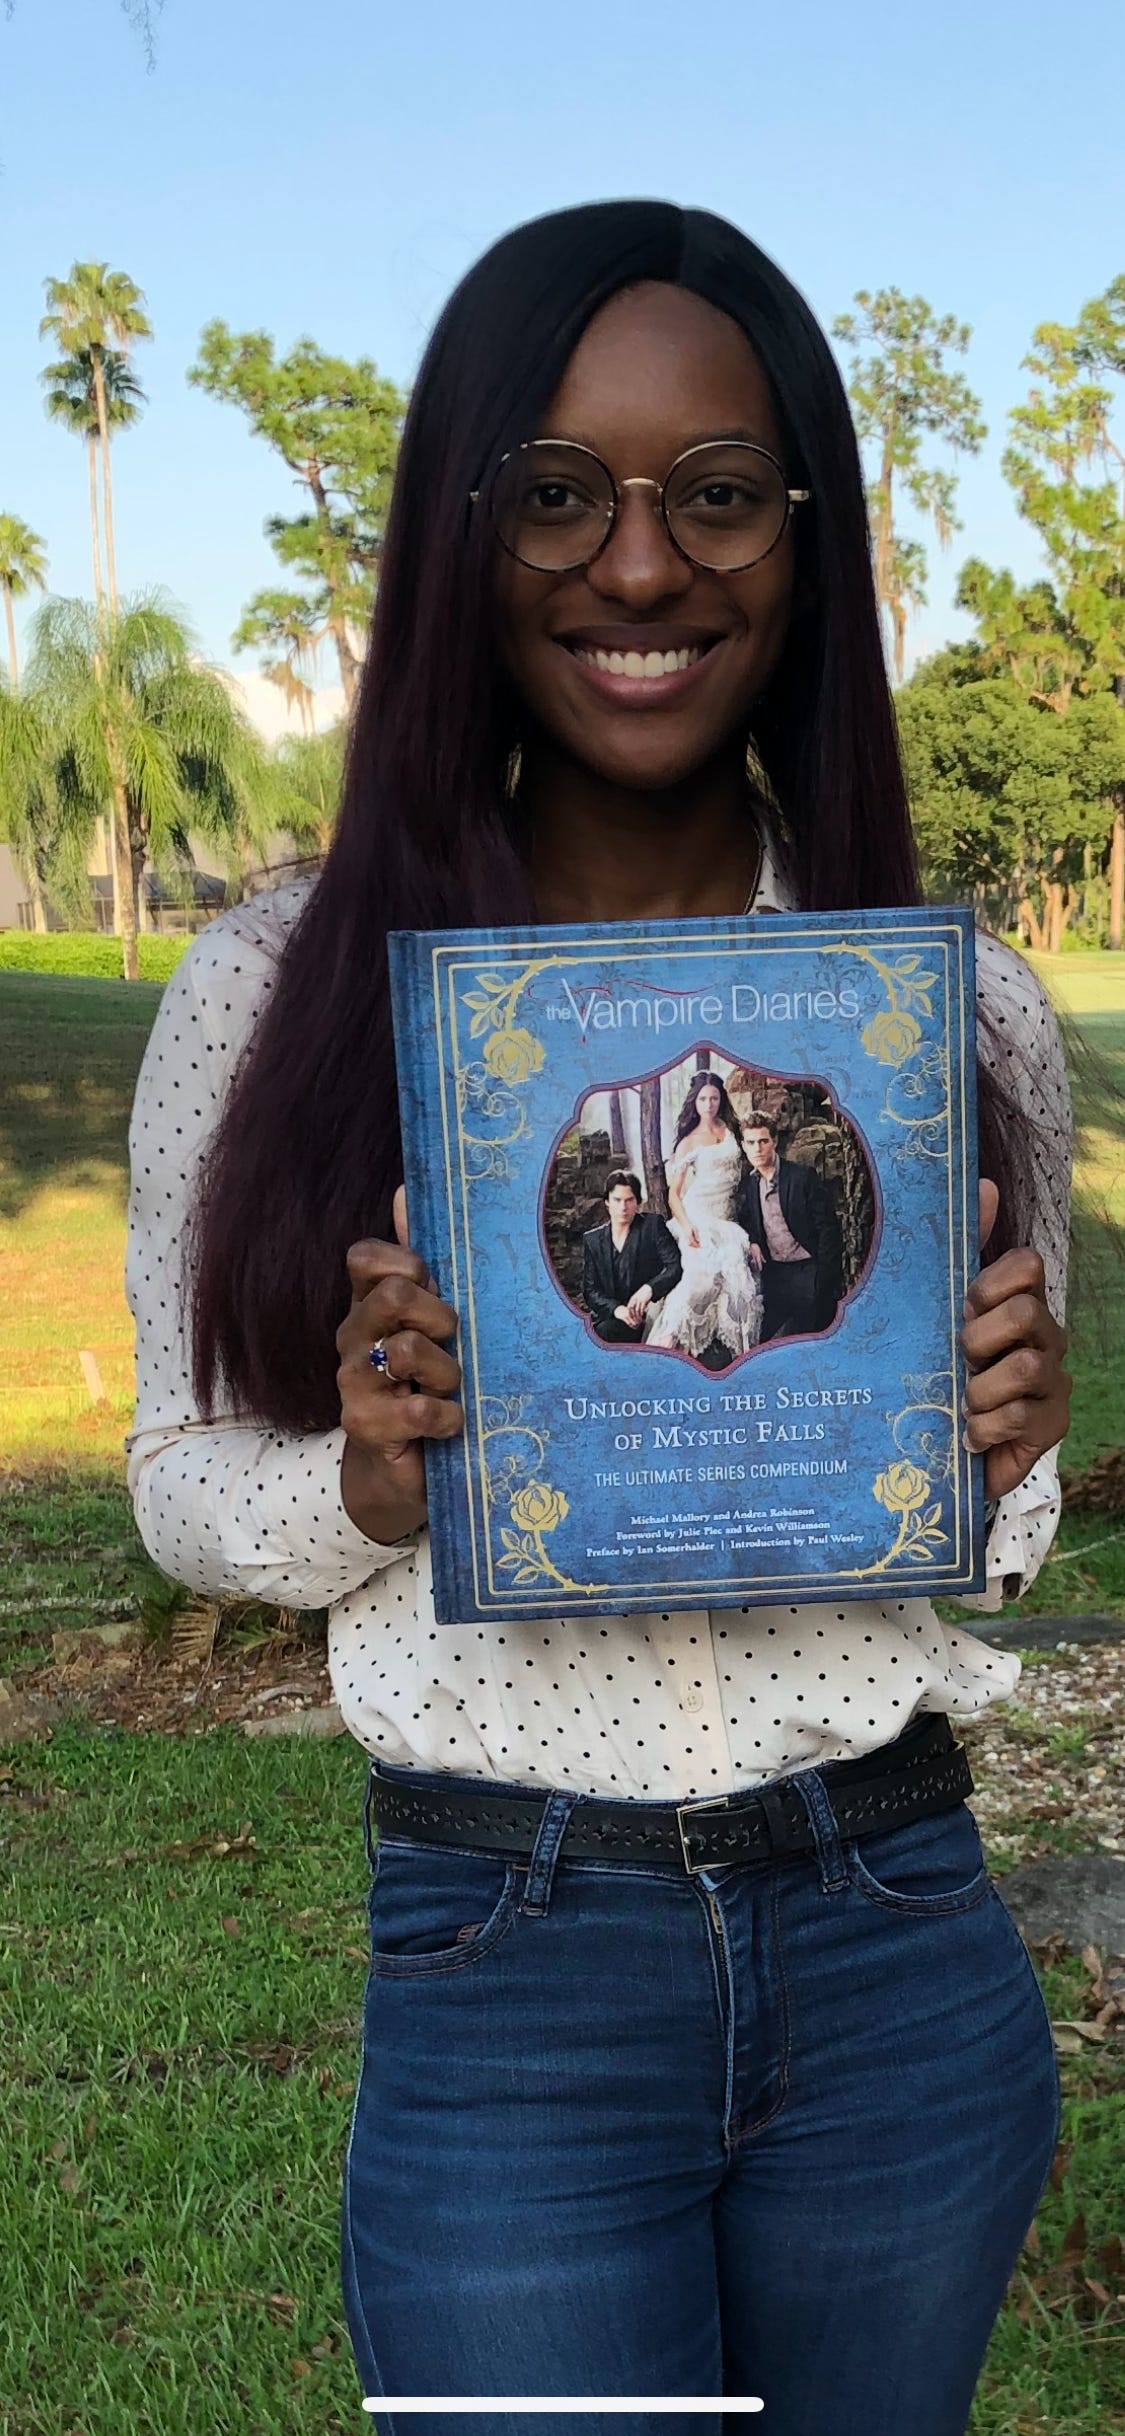 A photo of Kat Lewis holding the book, The Vampire Diaries: Unlocking the Secrets of Mystic Falls.